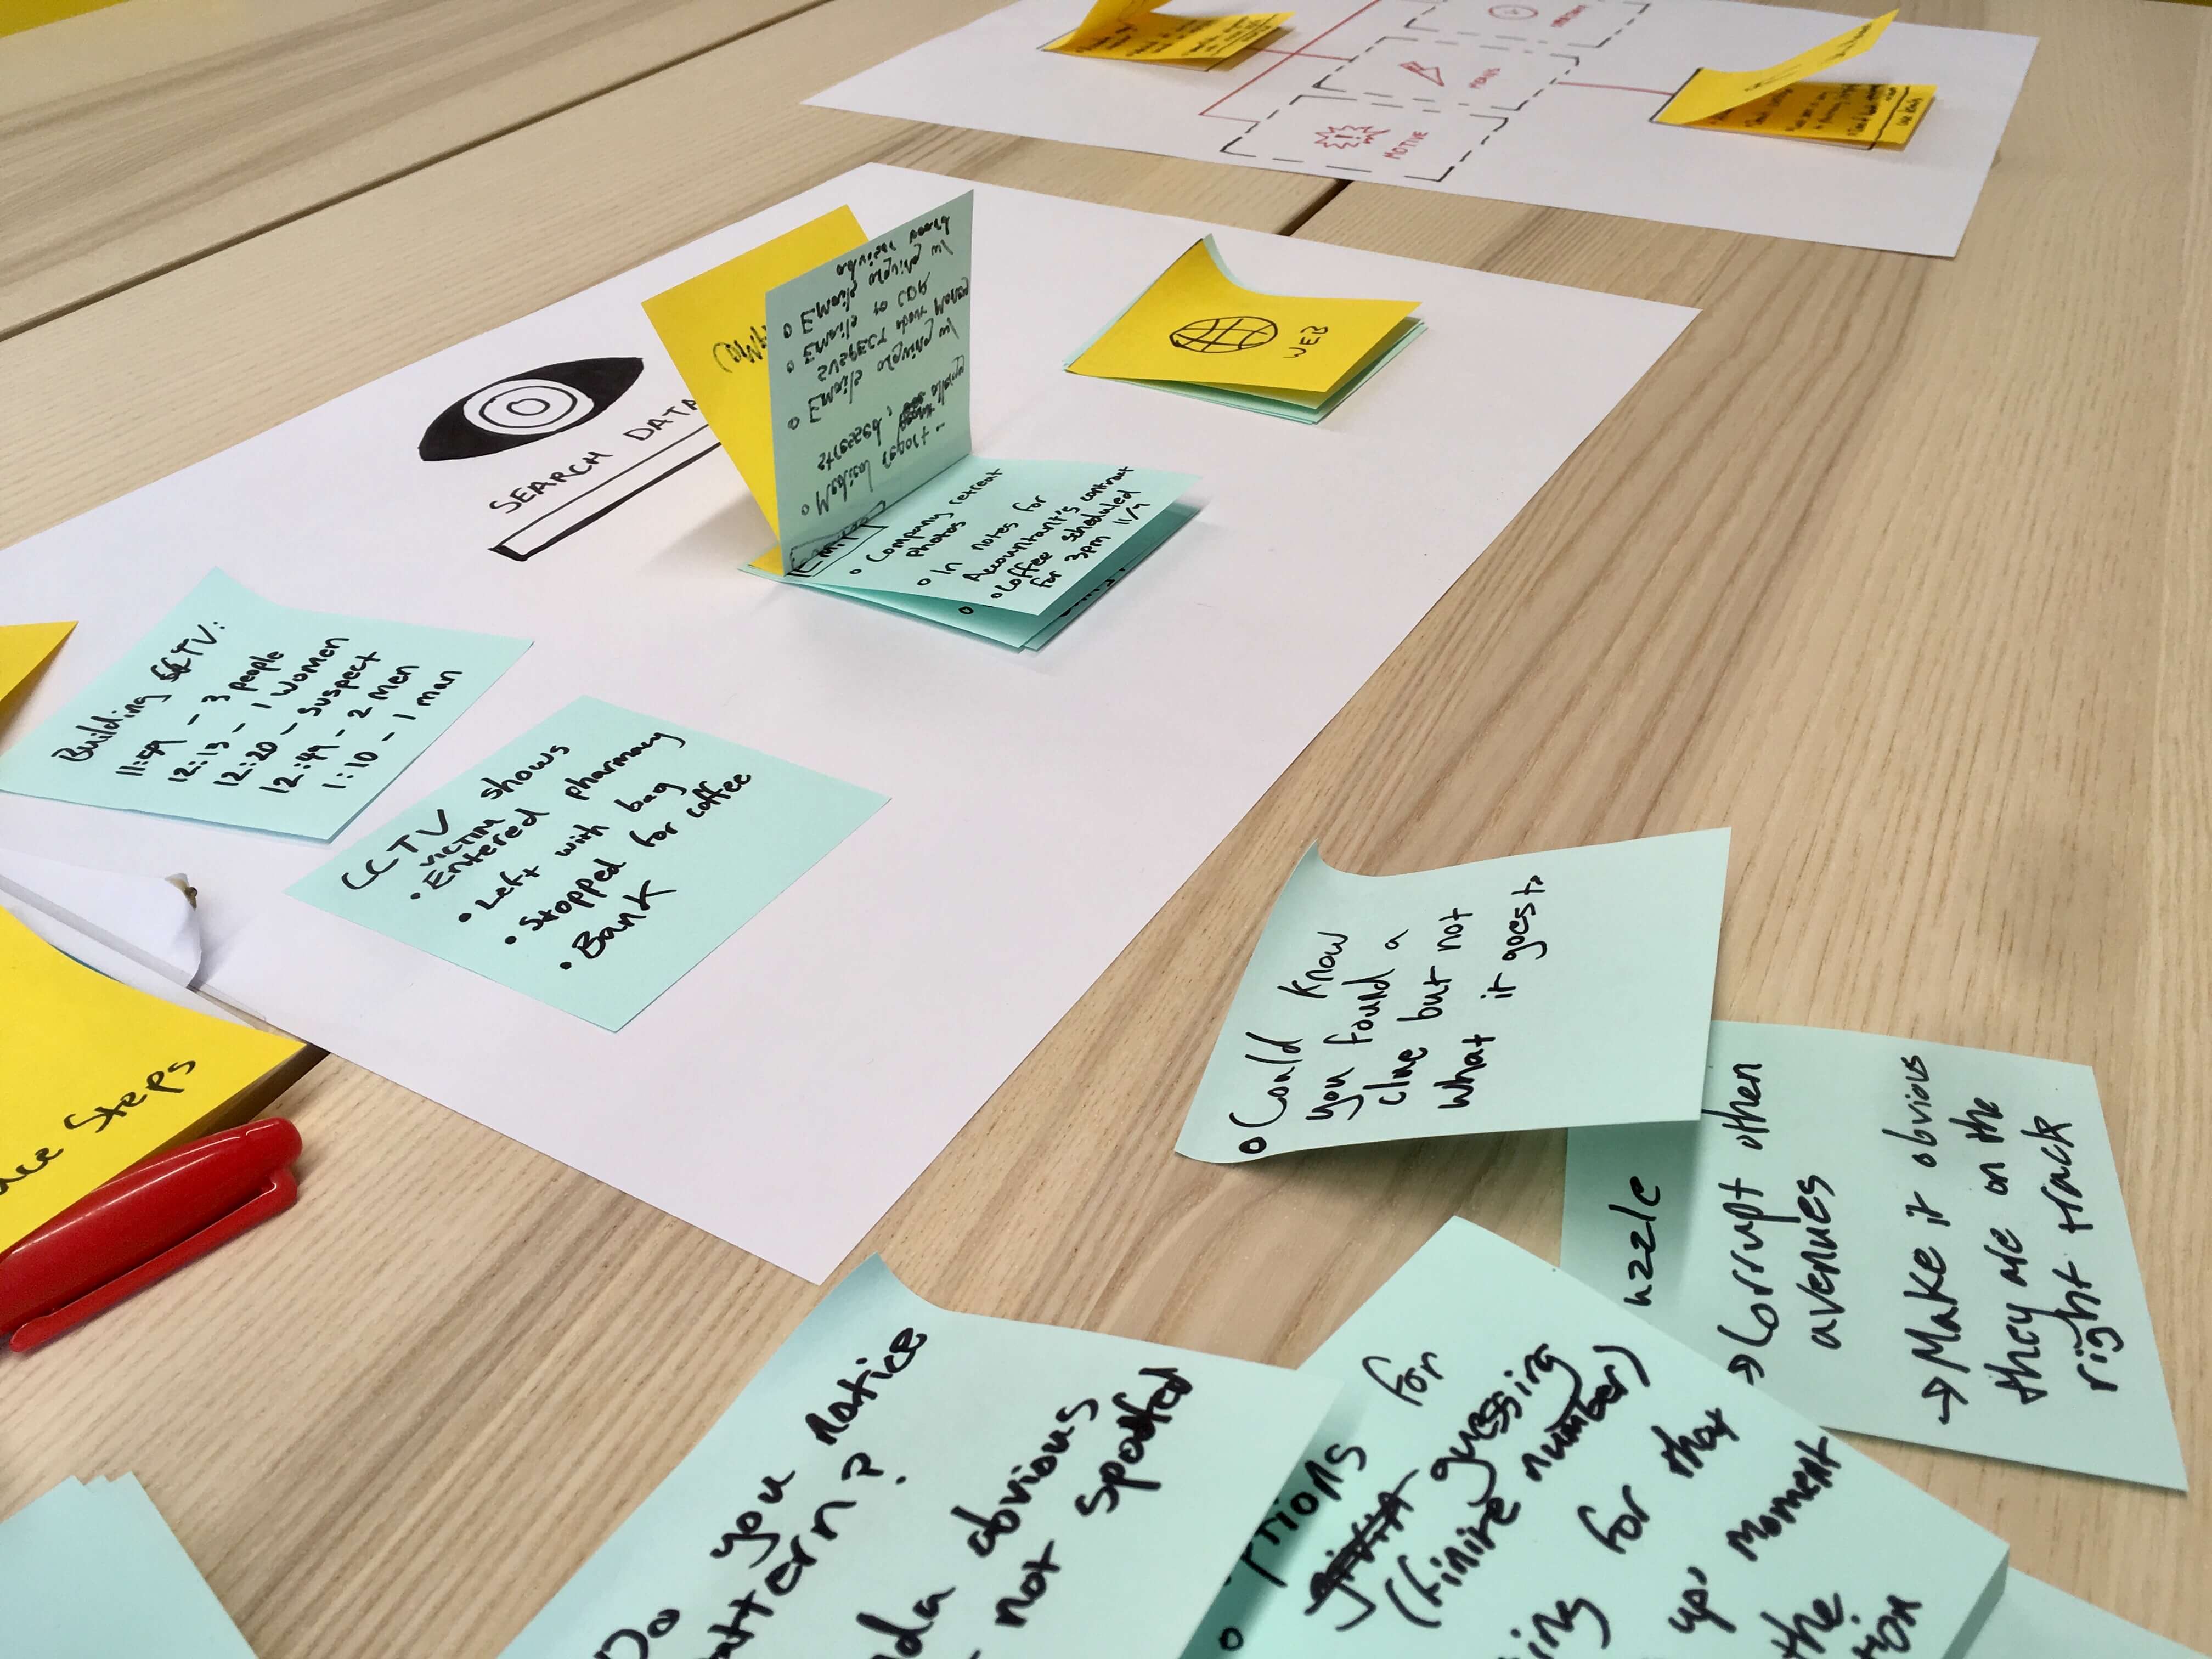 The core gameplay loop tying clues to motive, means, and opportunity, prototyped using paper and sticky notes.